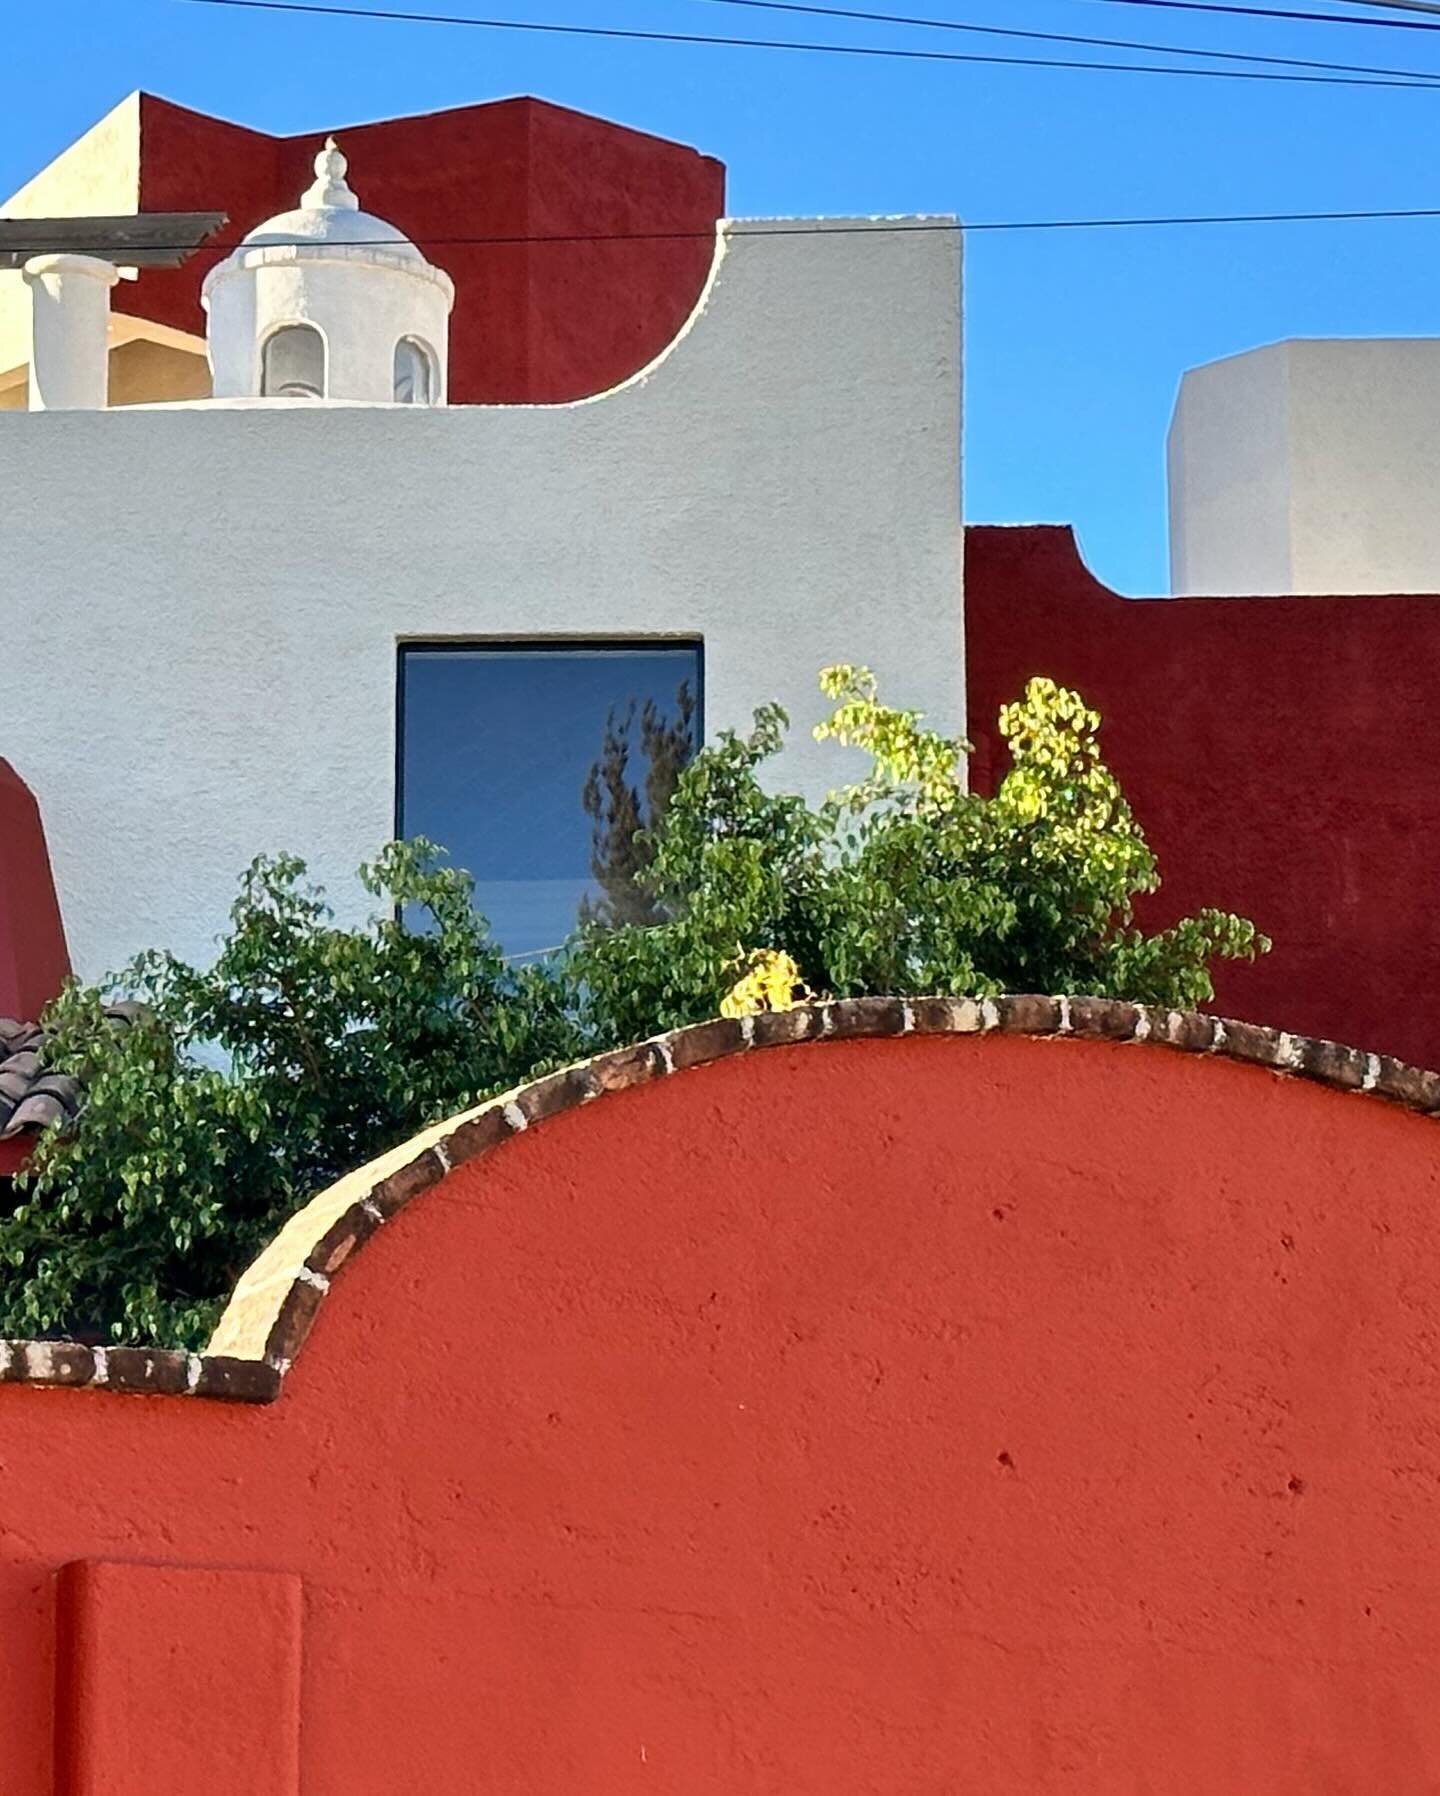 Design Lessons From Mexico:
Respect natural surroundings, use available resources, carefully carve geometric environments with color and just the right curves